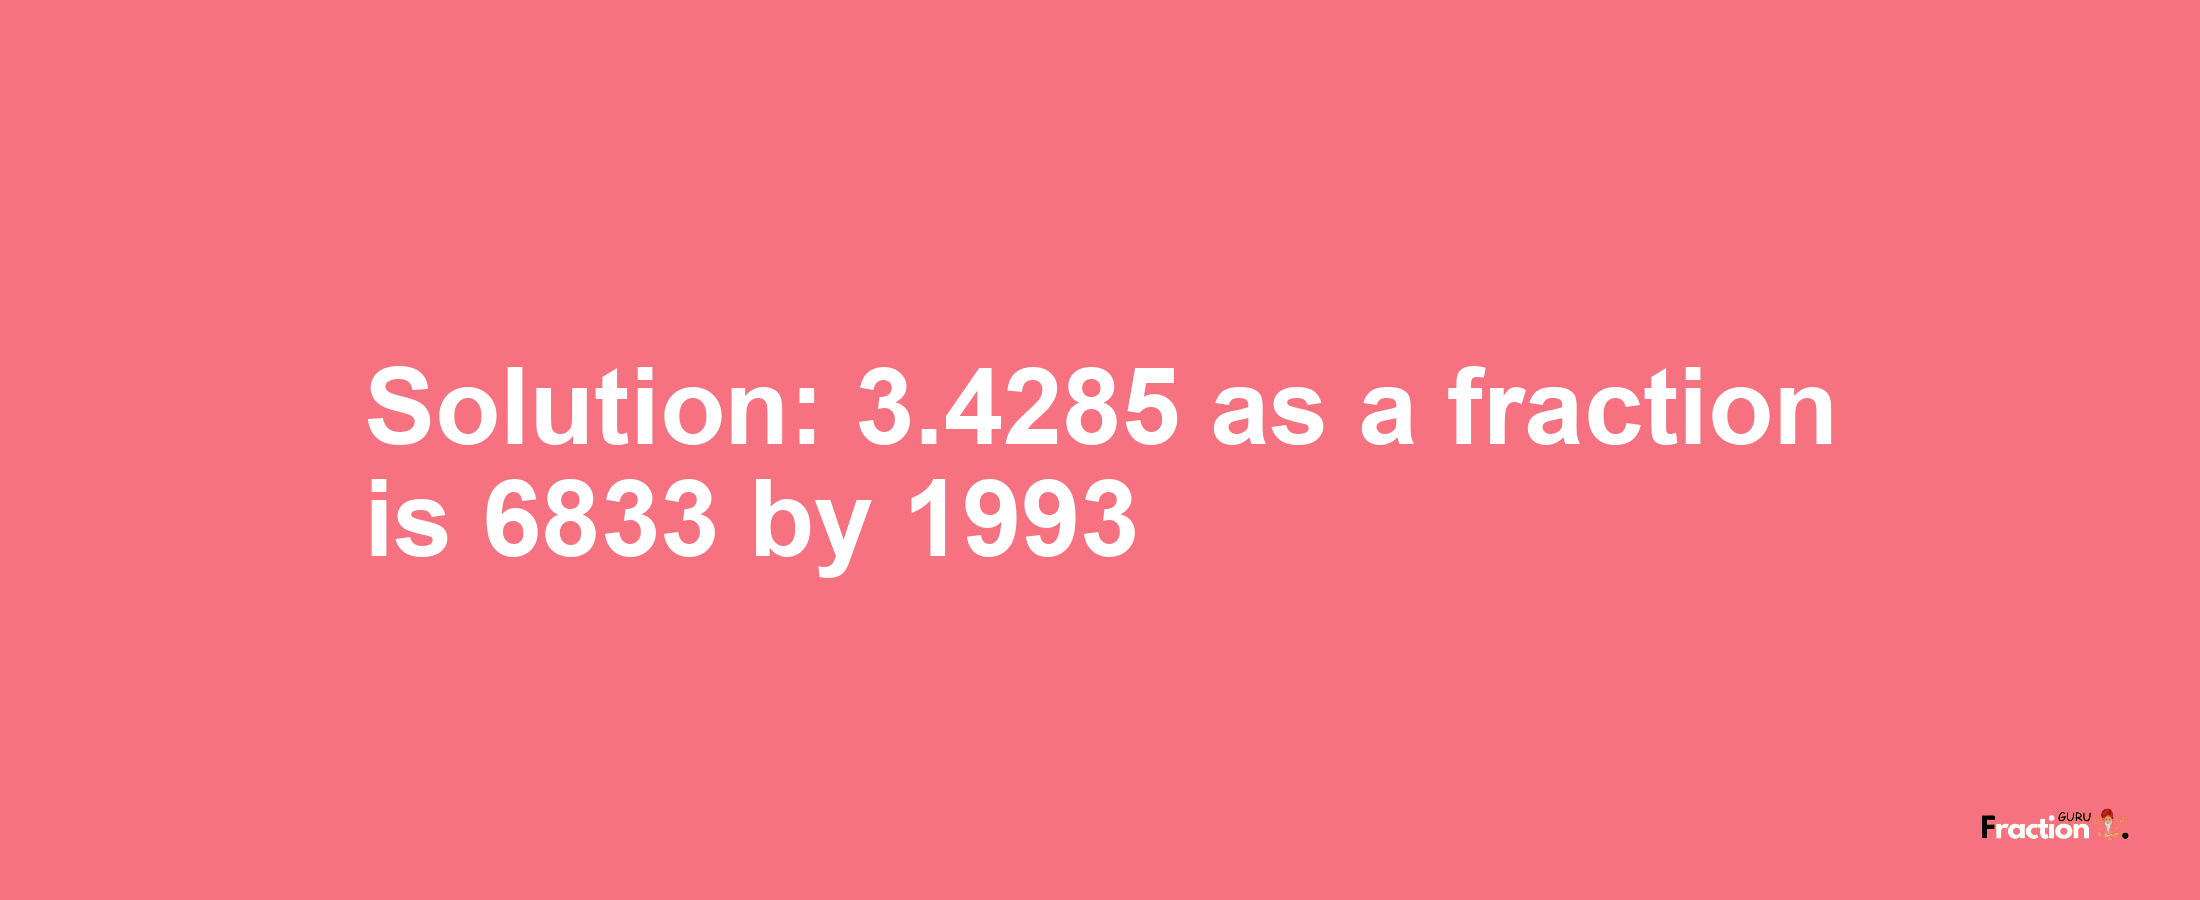 Solution:3.4285 as a fraction is 6833/1993